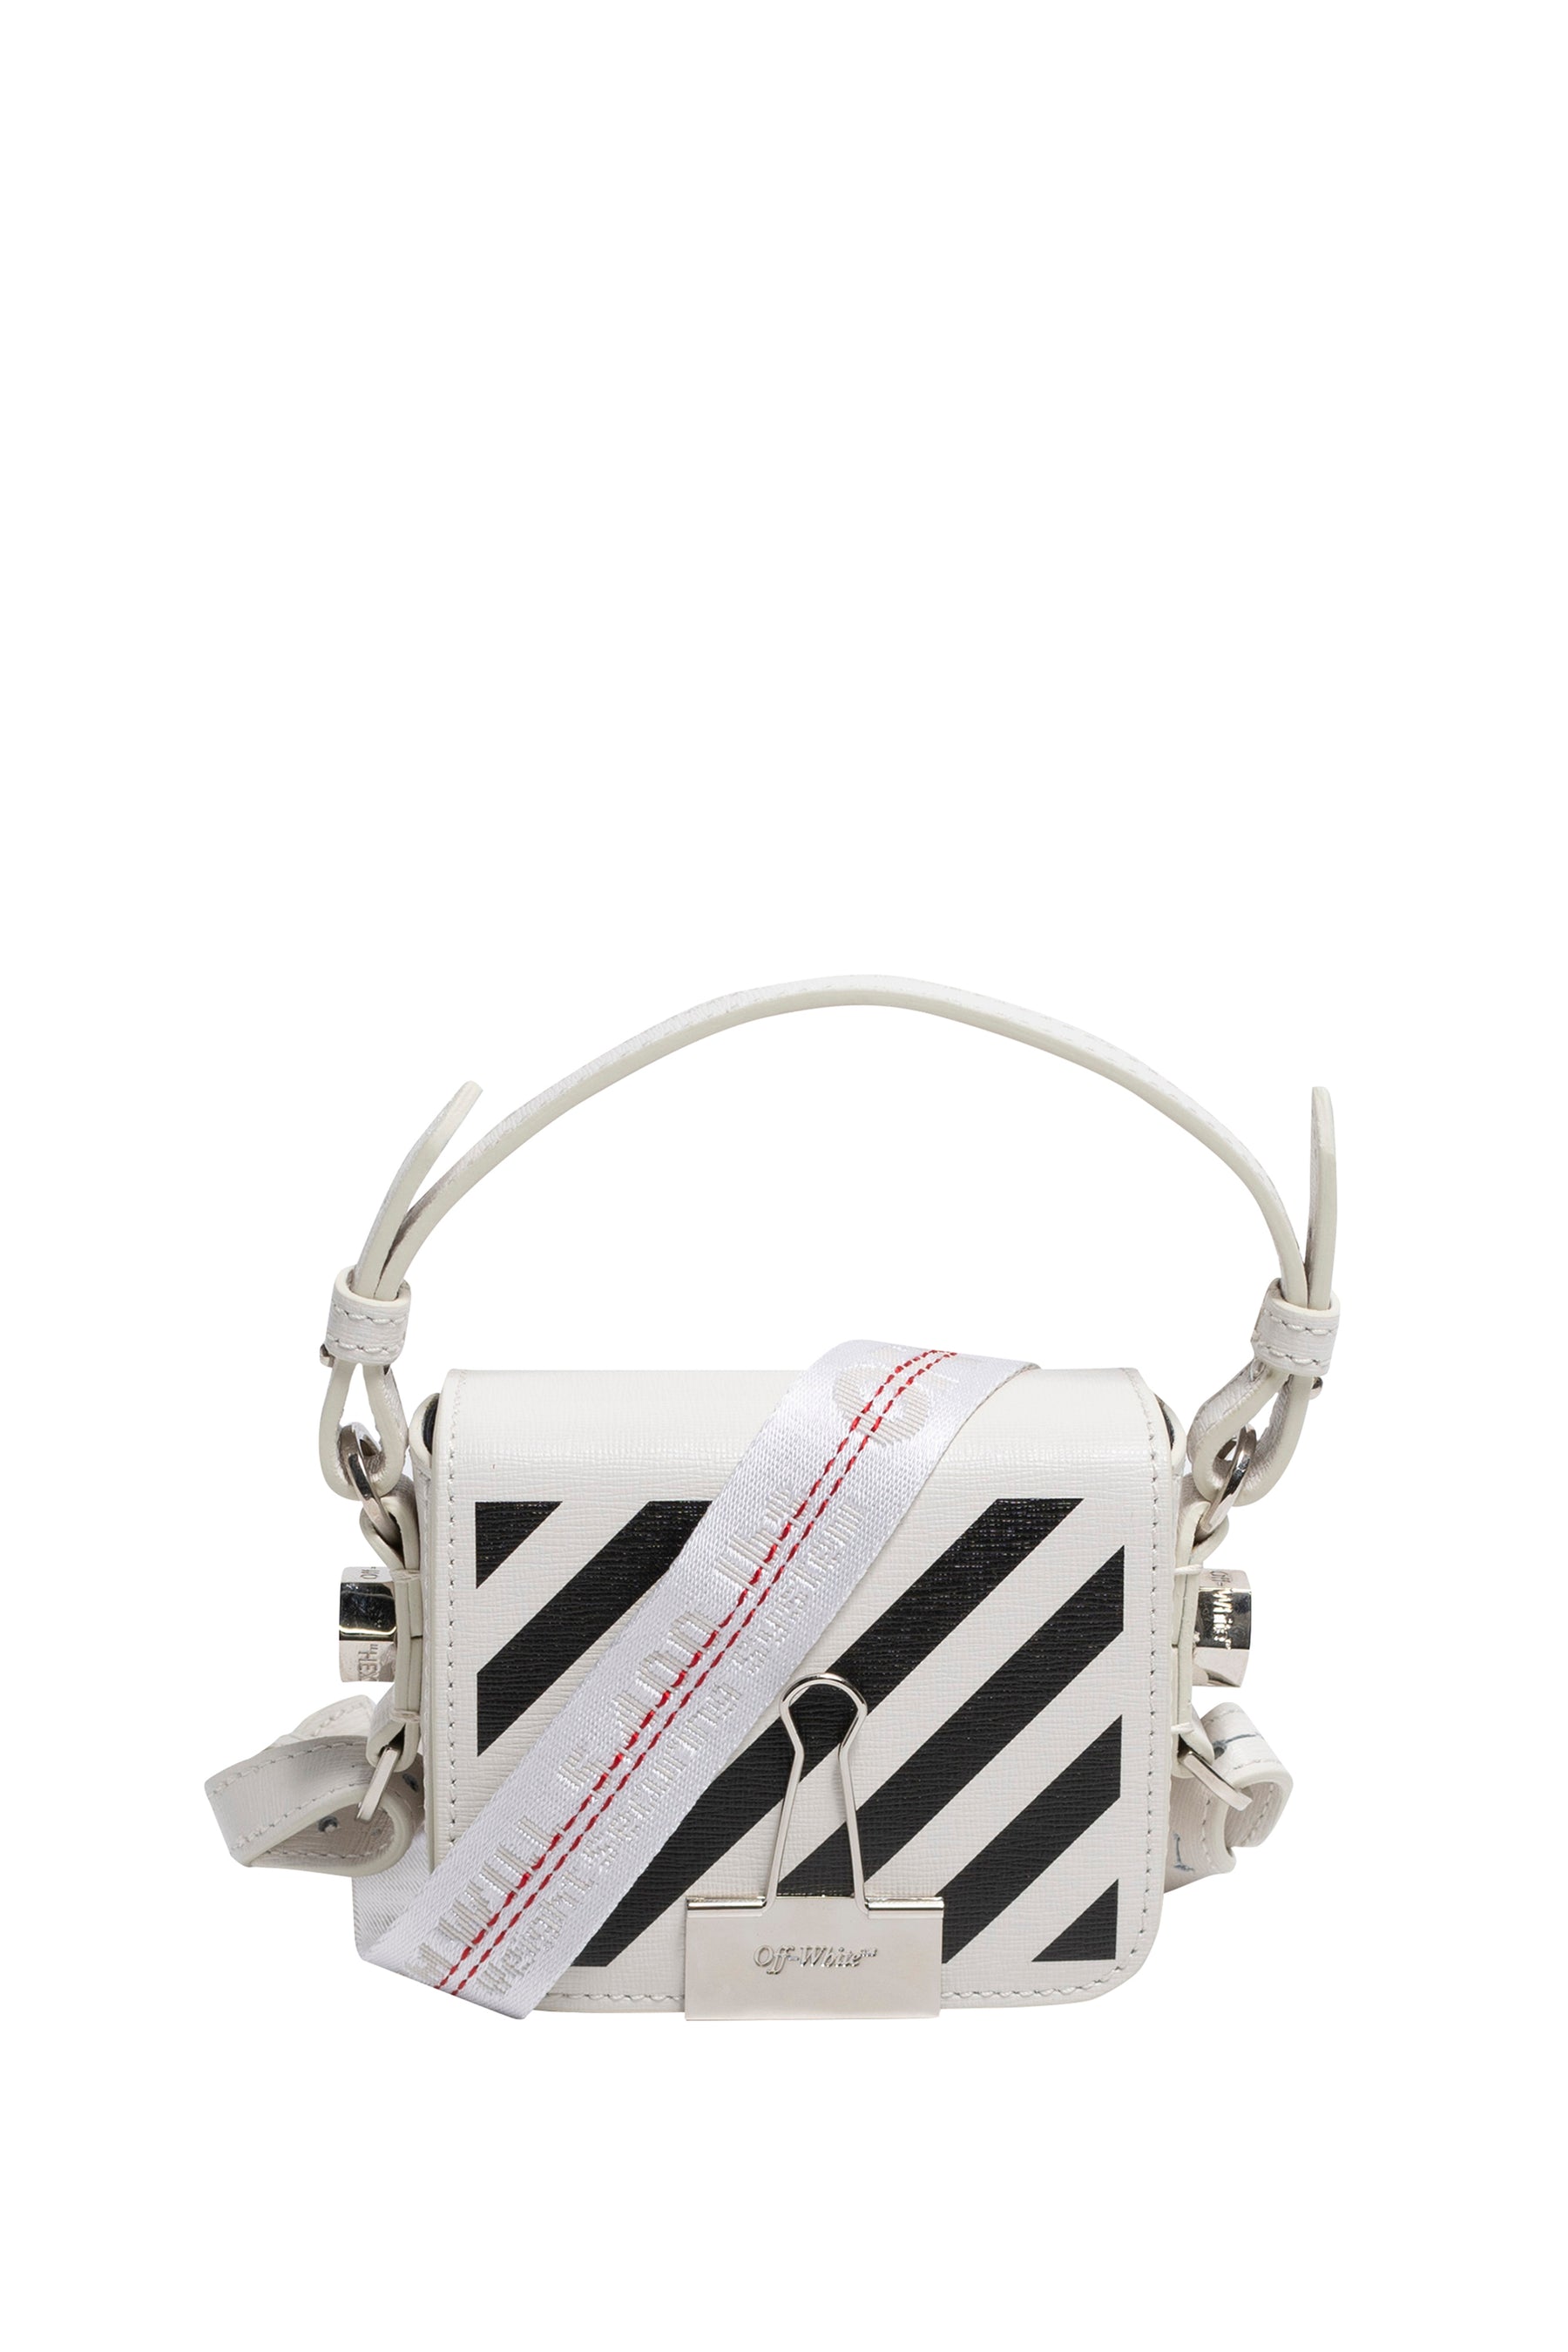 Off-White Diag Flap Bag Red